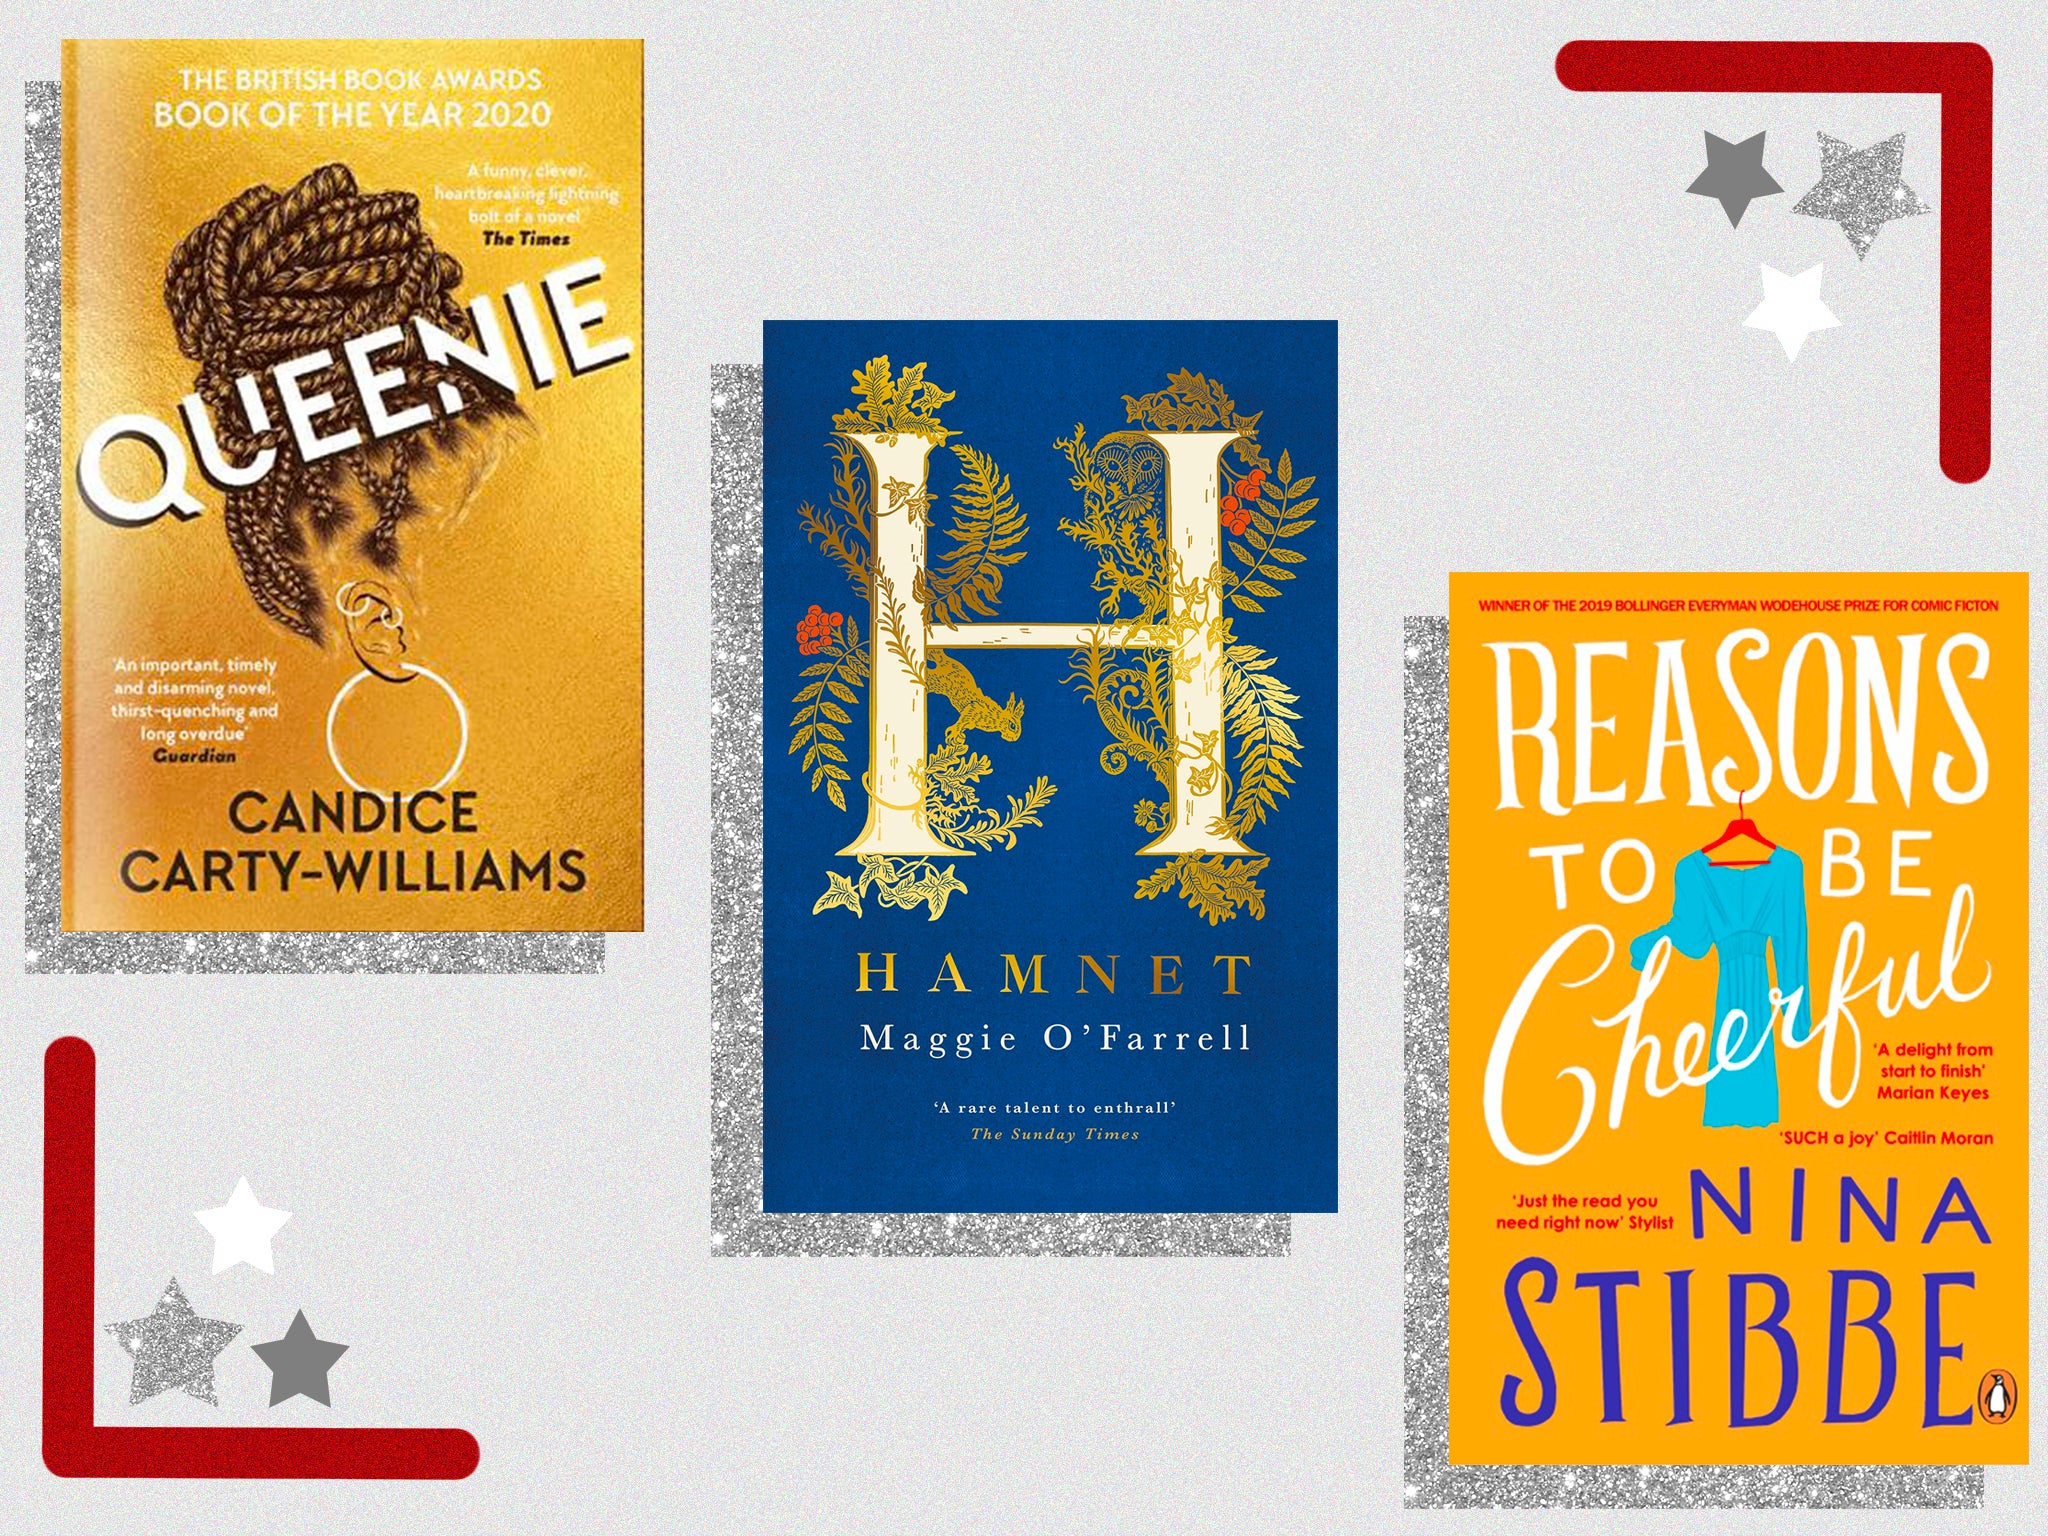 The award-winning books of 2020 to gift this Christmas